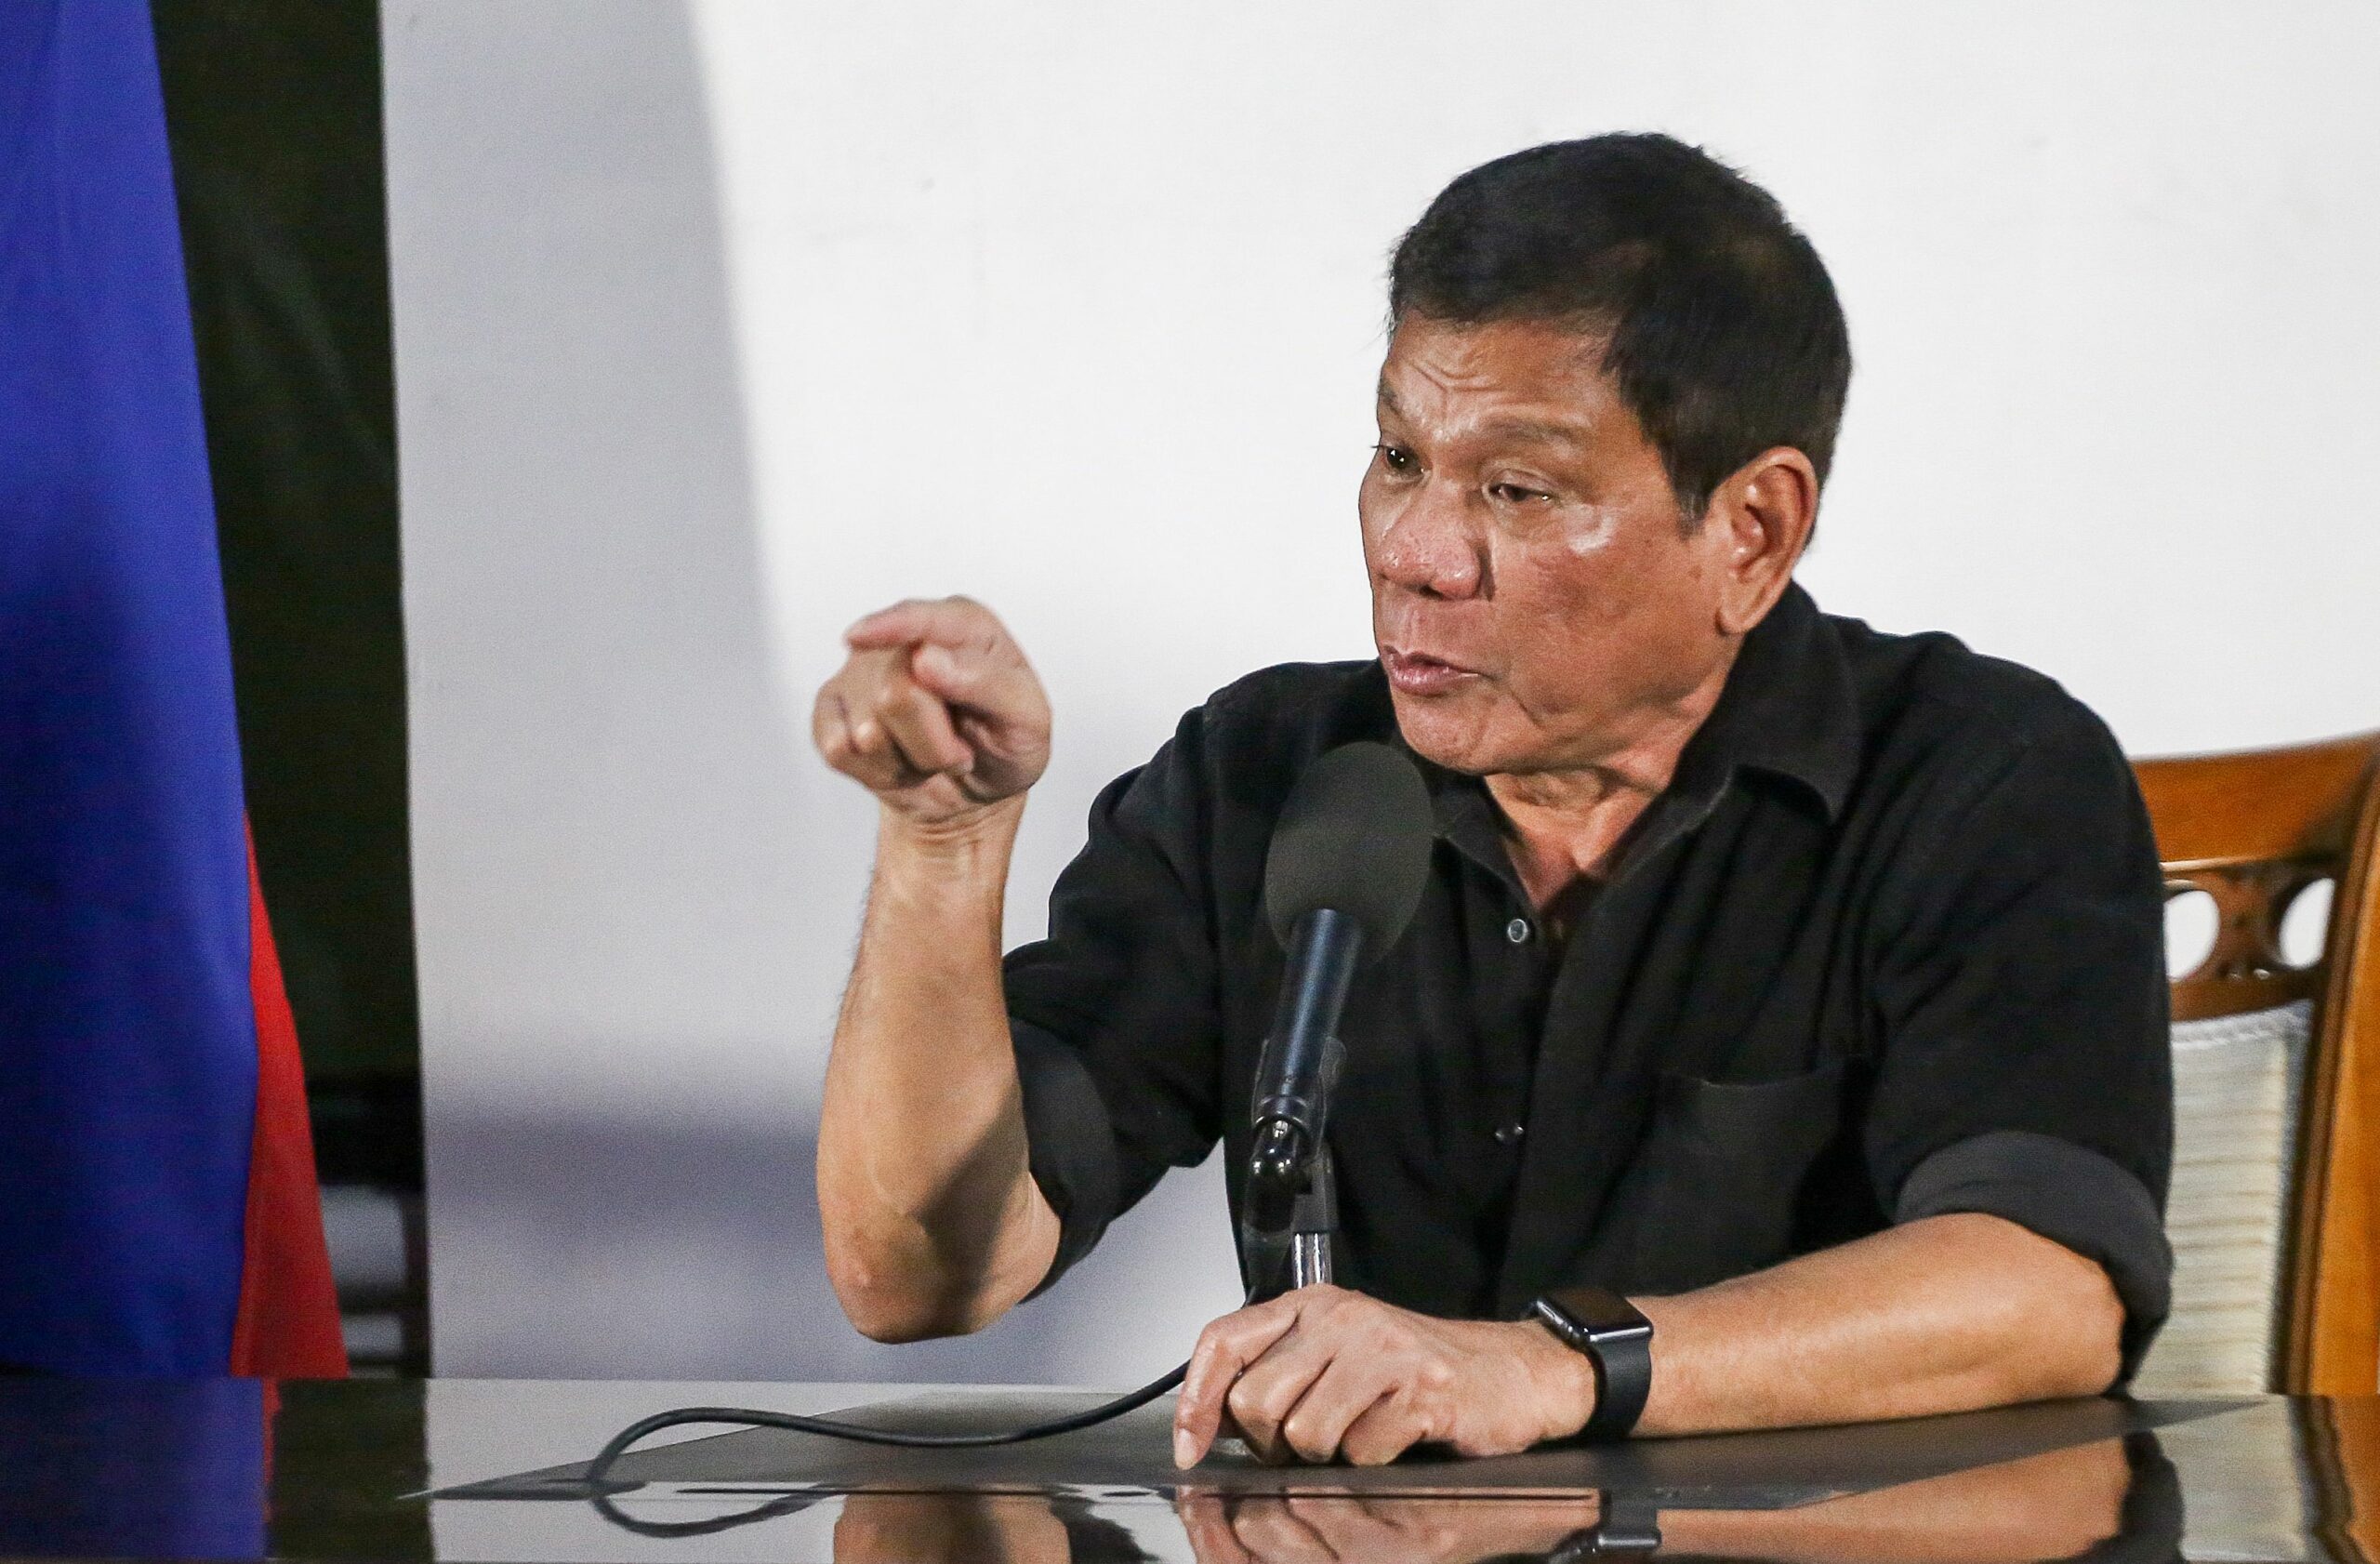 Philippines President Rodrigo Duterte Is About to Be Investigated for All the Drug Dealers He’s Killed